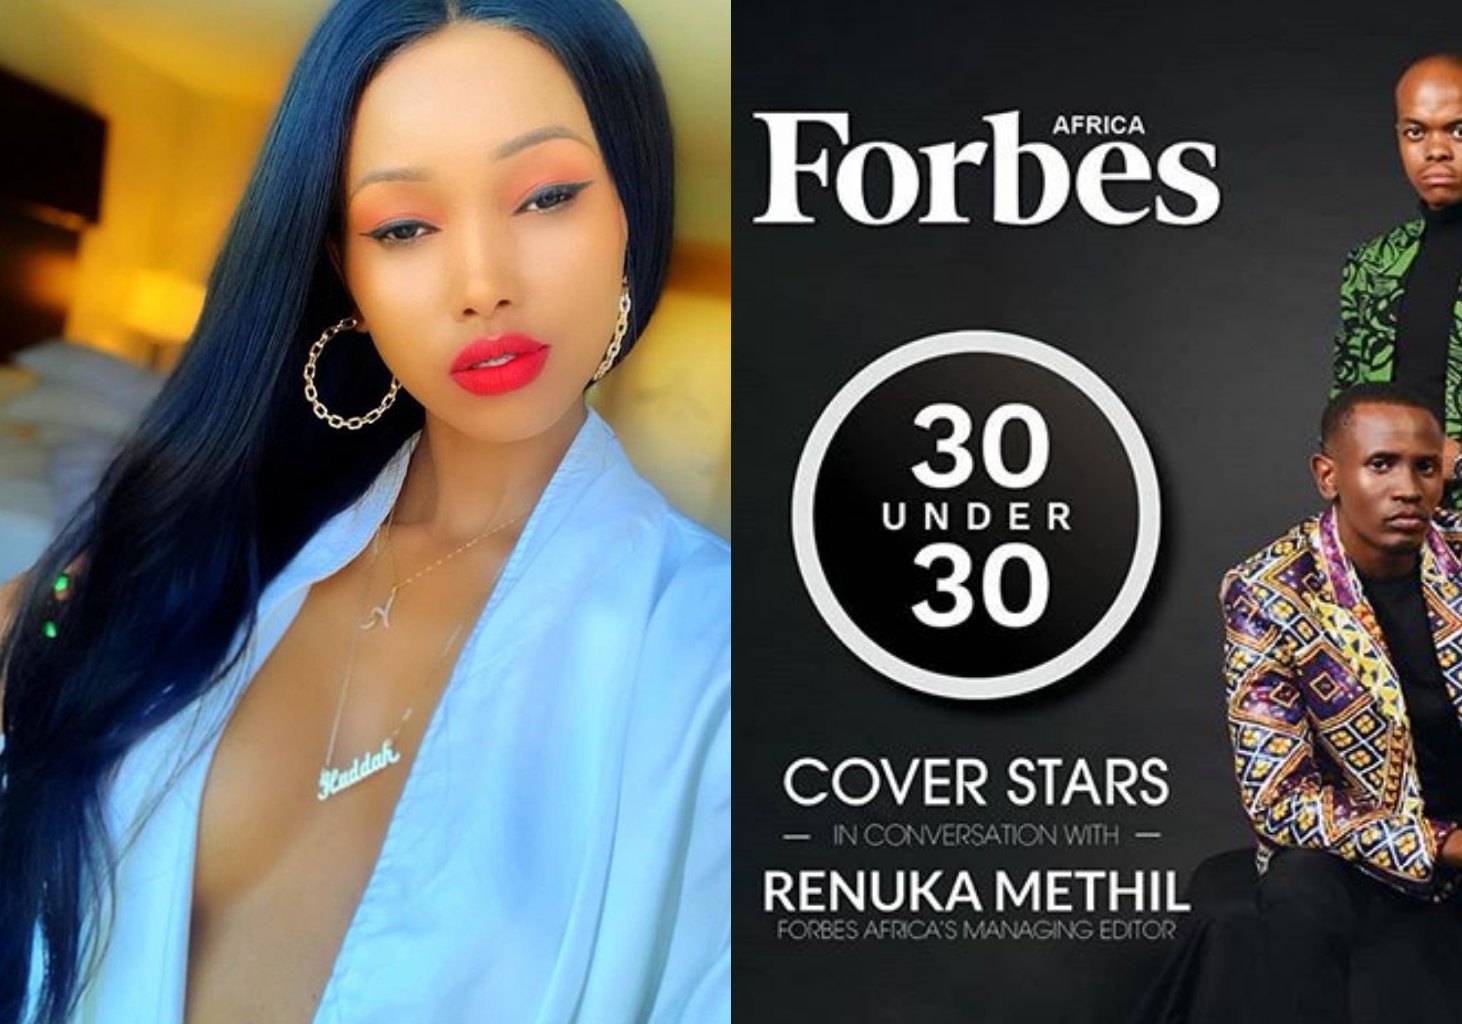 "It's connection and not Hardwork" – Socialite, Huddah Monroe rubbishes 2020 Forbes Africa 30 under 30 List